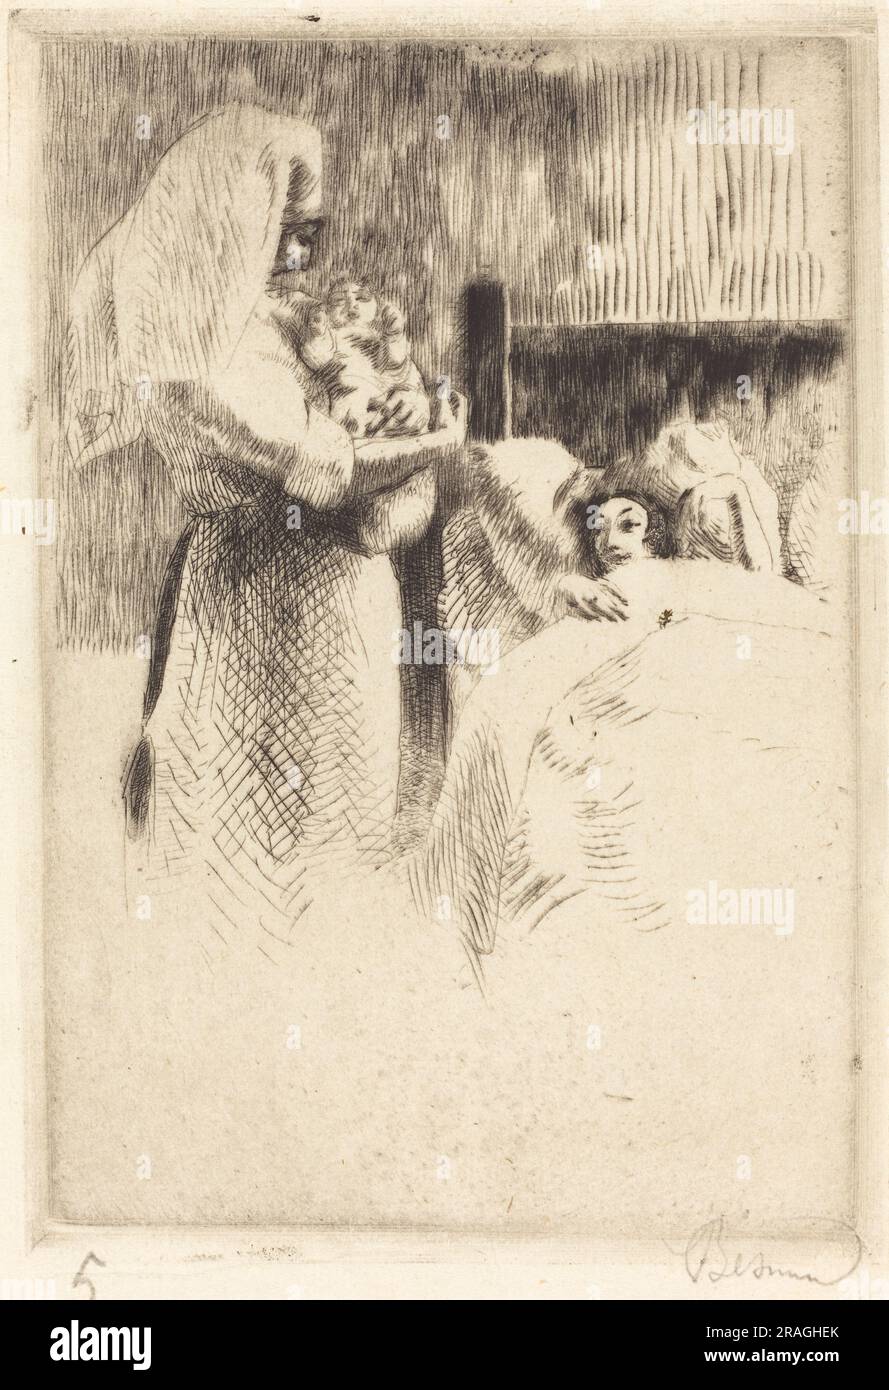 'Albert Besnard, Birth Announcement for Anne-Élisabeth Besnard (Carte de naissance d'Anne-Élisabeth Besnard), 1922, etching and drypoint in black on white laid paper, plate: 17.2 x 11.9 cm (6 3/4 x 4 11/16 in.) sheet: 20.2 x 13.5 cm (7 15/16 x 5 5/16 in.), Gift of Mr. and Mrs. Daniel Bell, 1993.71.20' Stock Photo